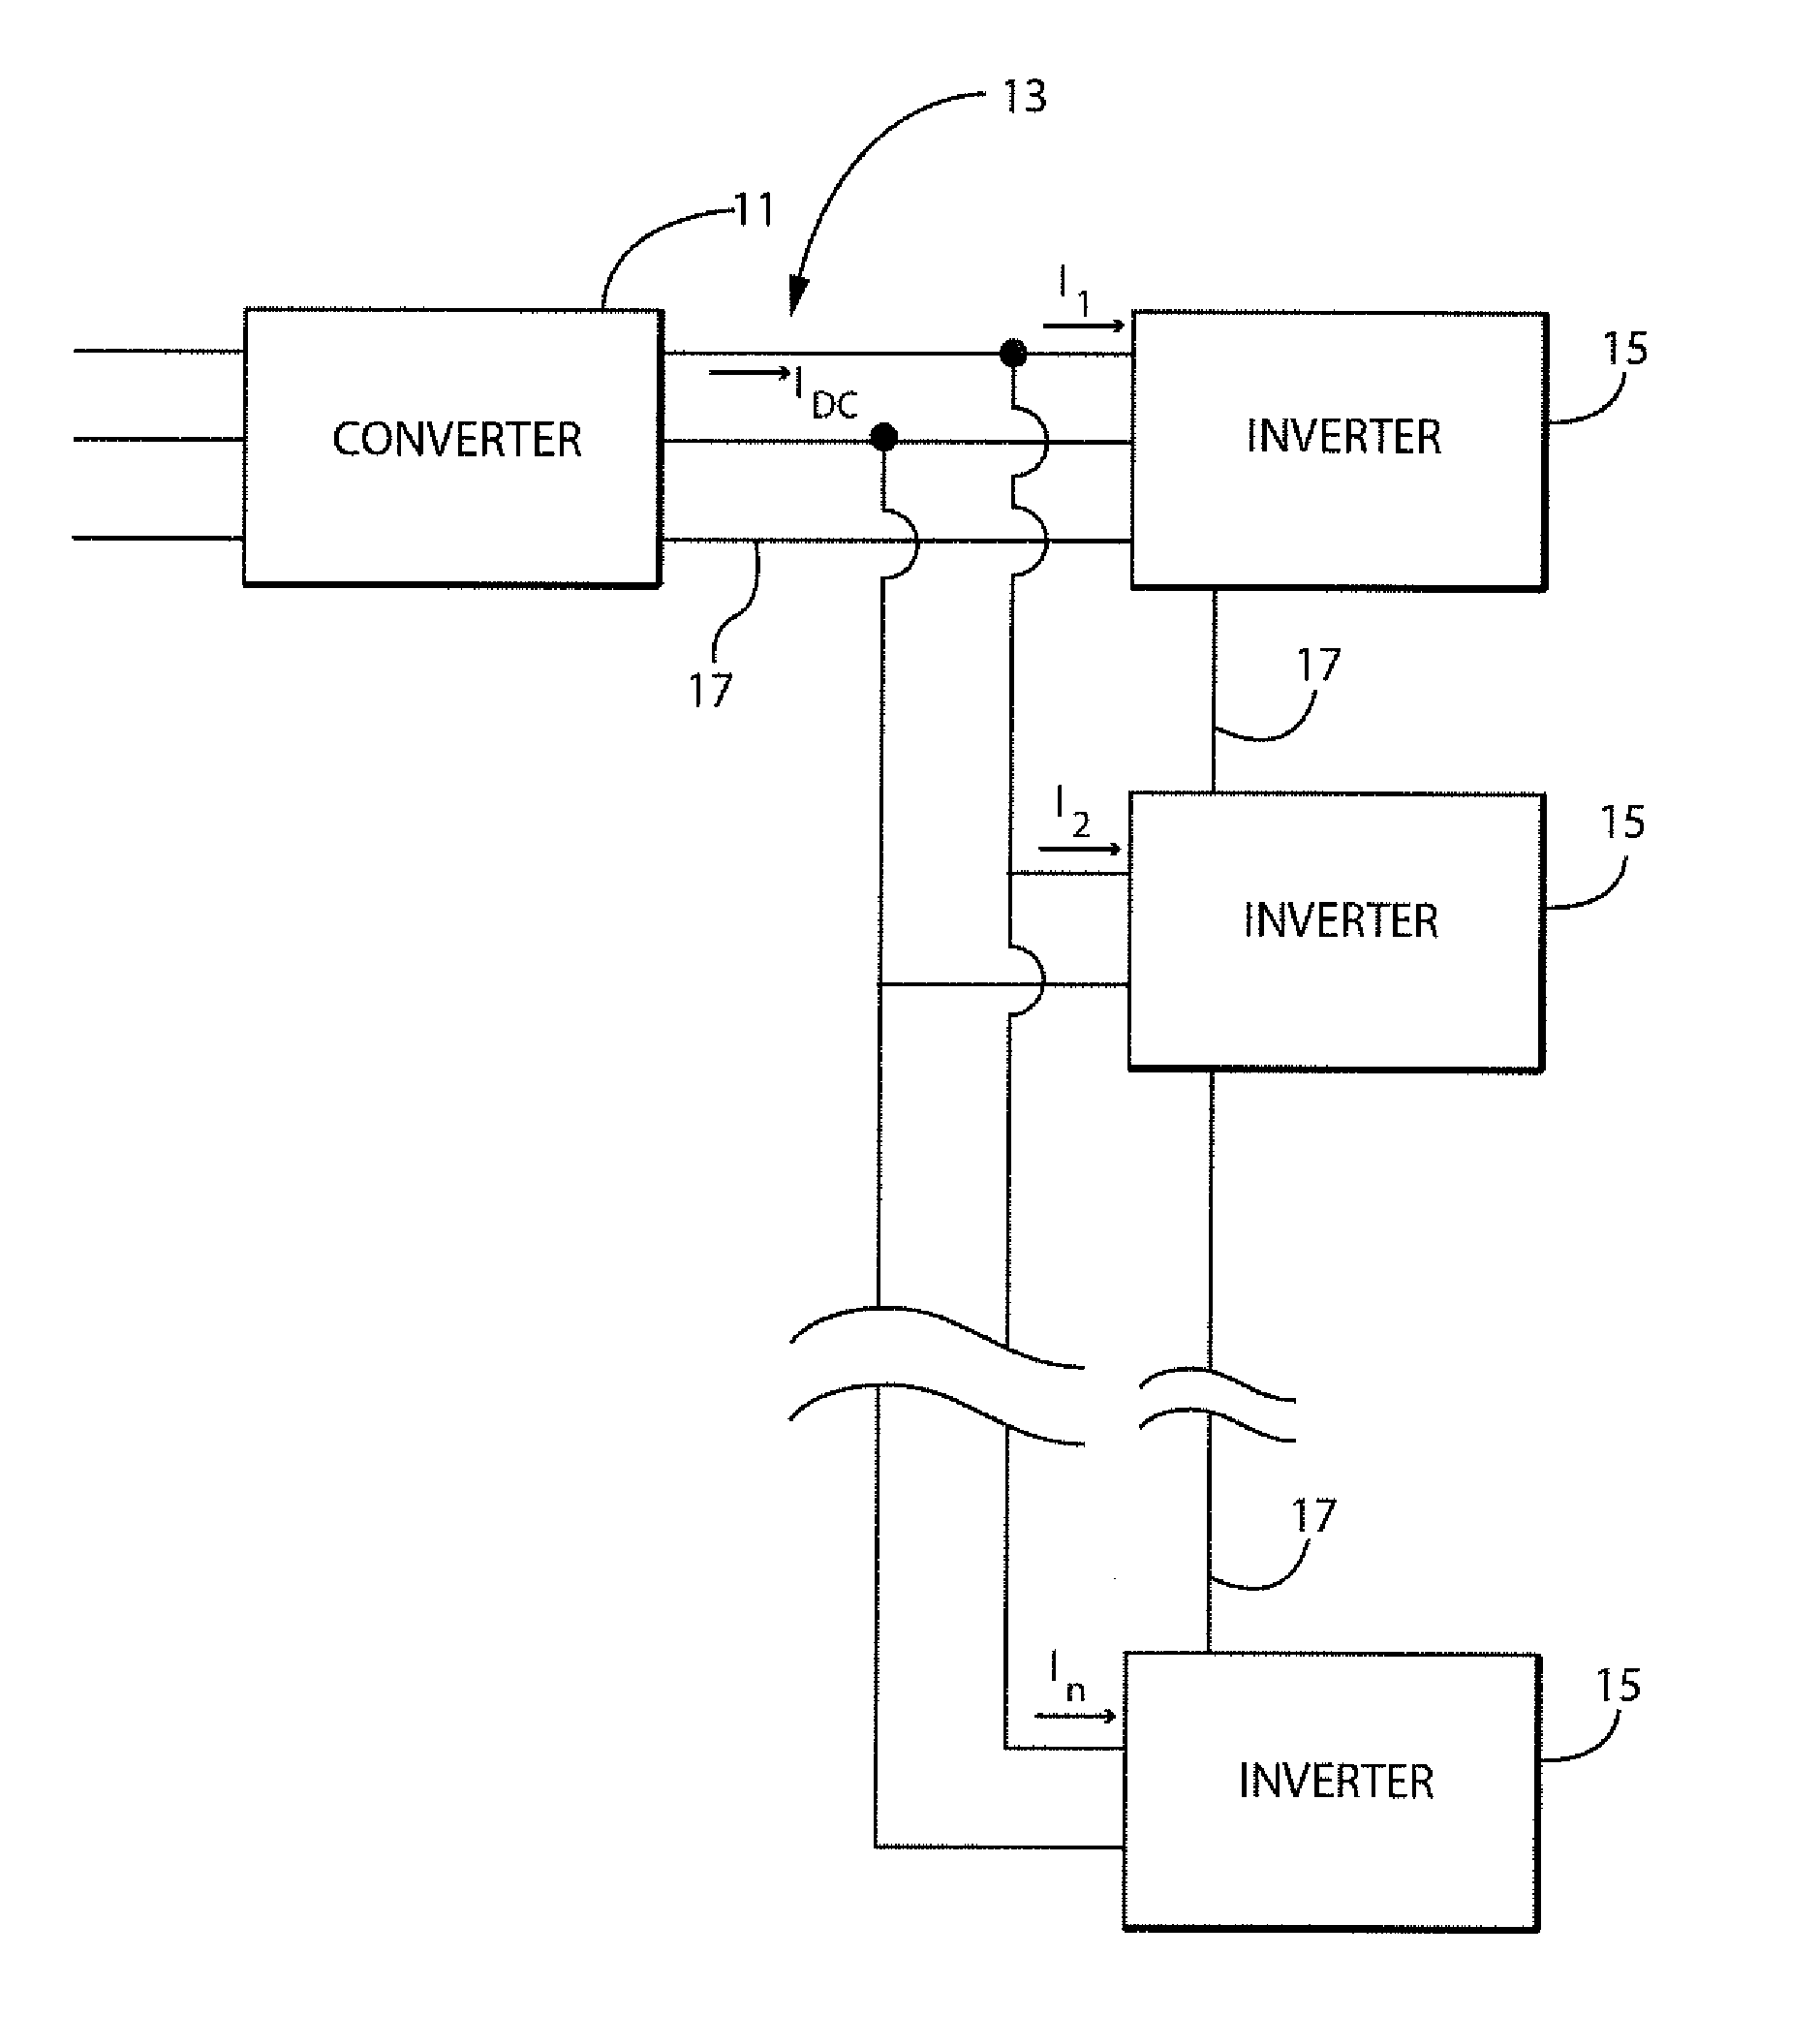 System and Method for Reducing Reactive Current on a Common DC Bus with Multiple Inverters